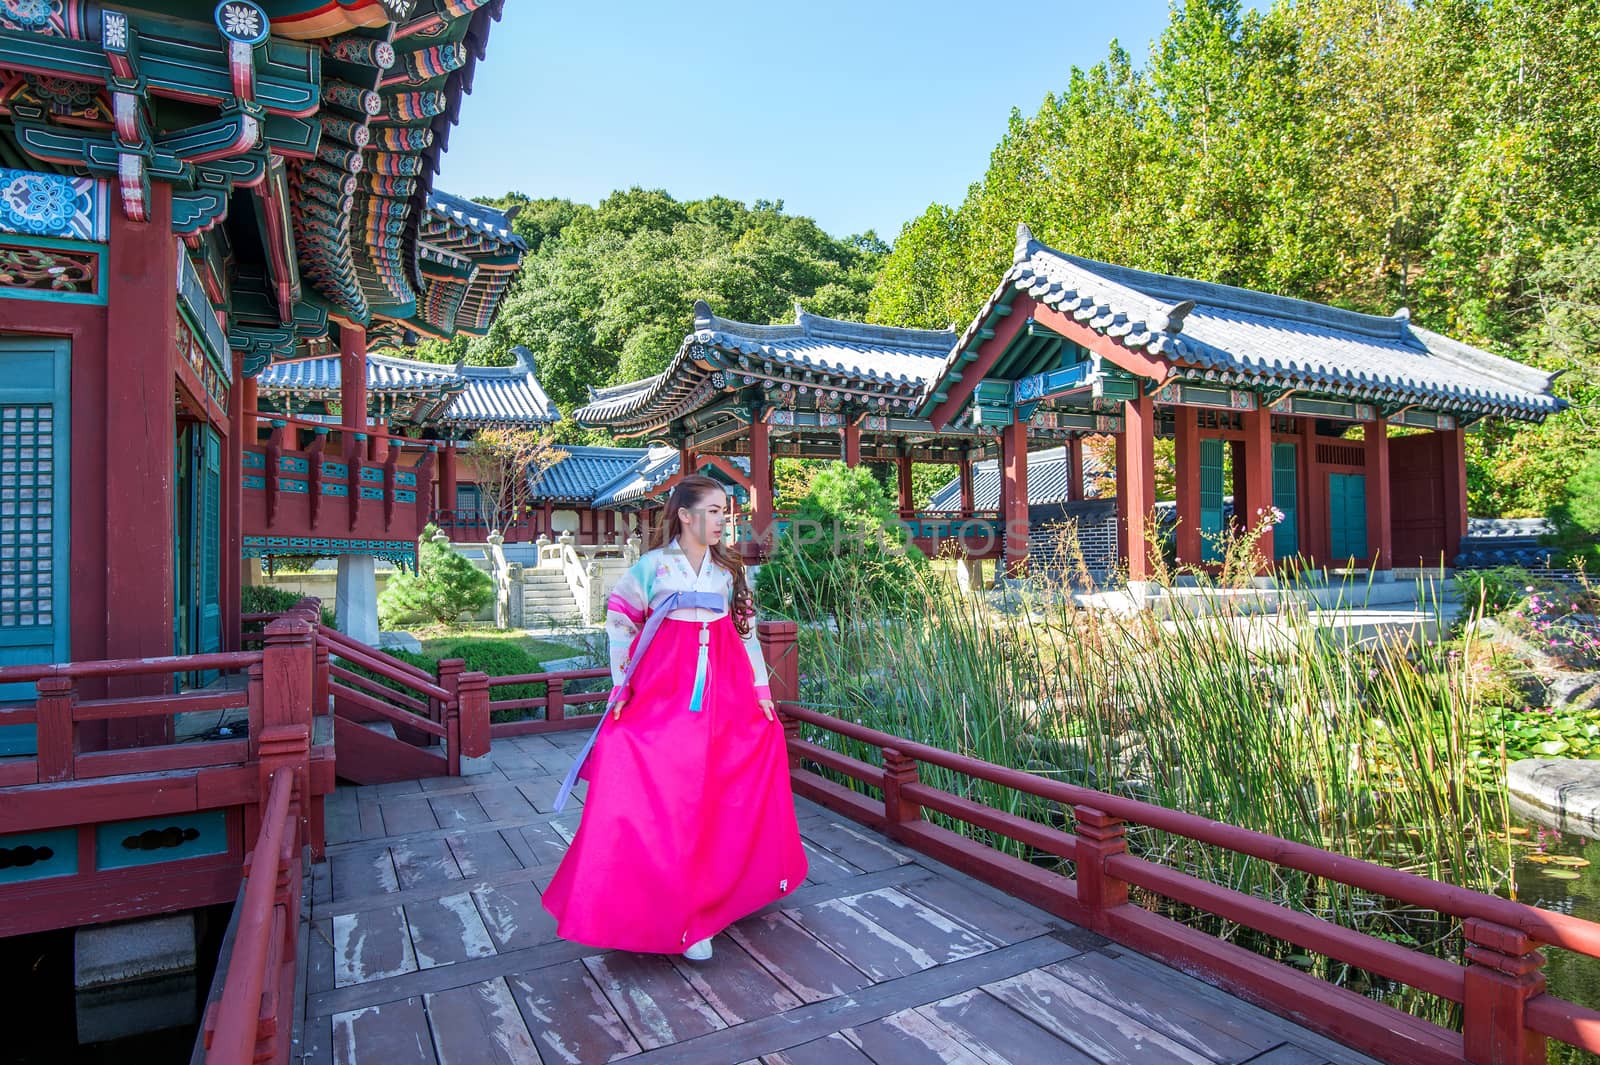 Woman with Hanbok in Gyeongbokgung,the traditional Korean dress. by gutarphotoghaphy